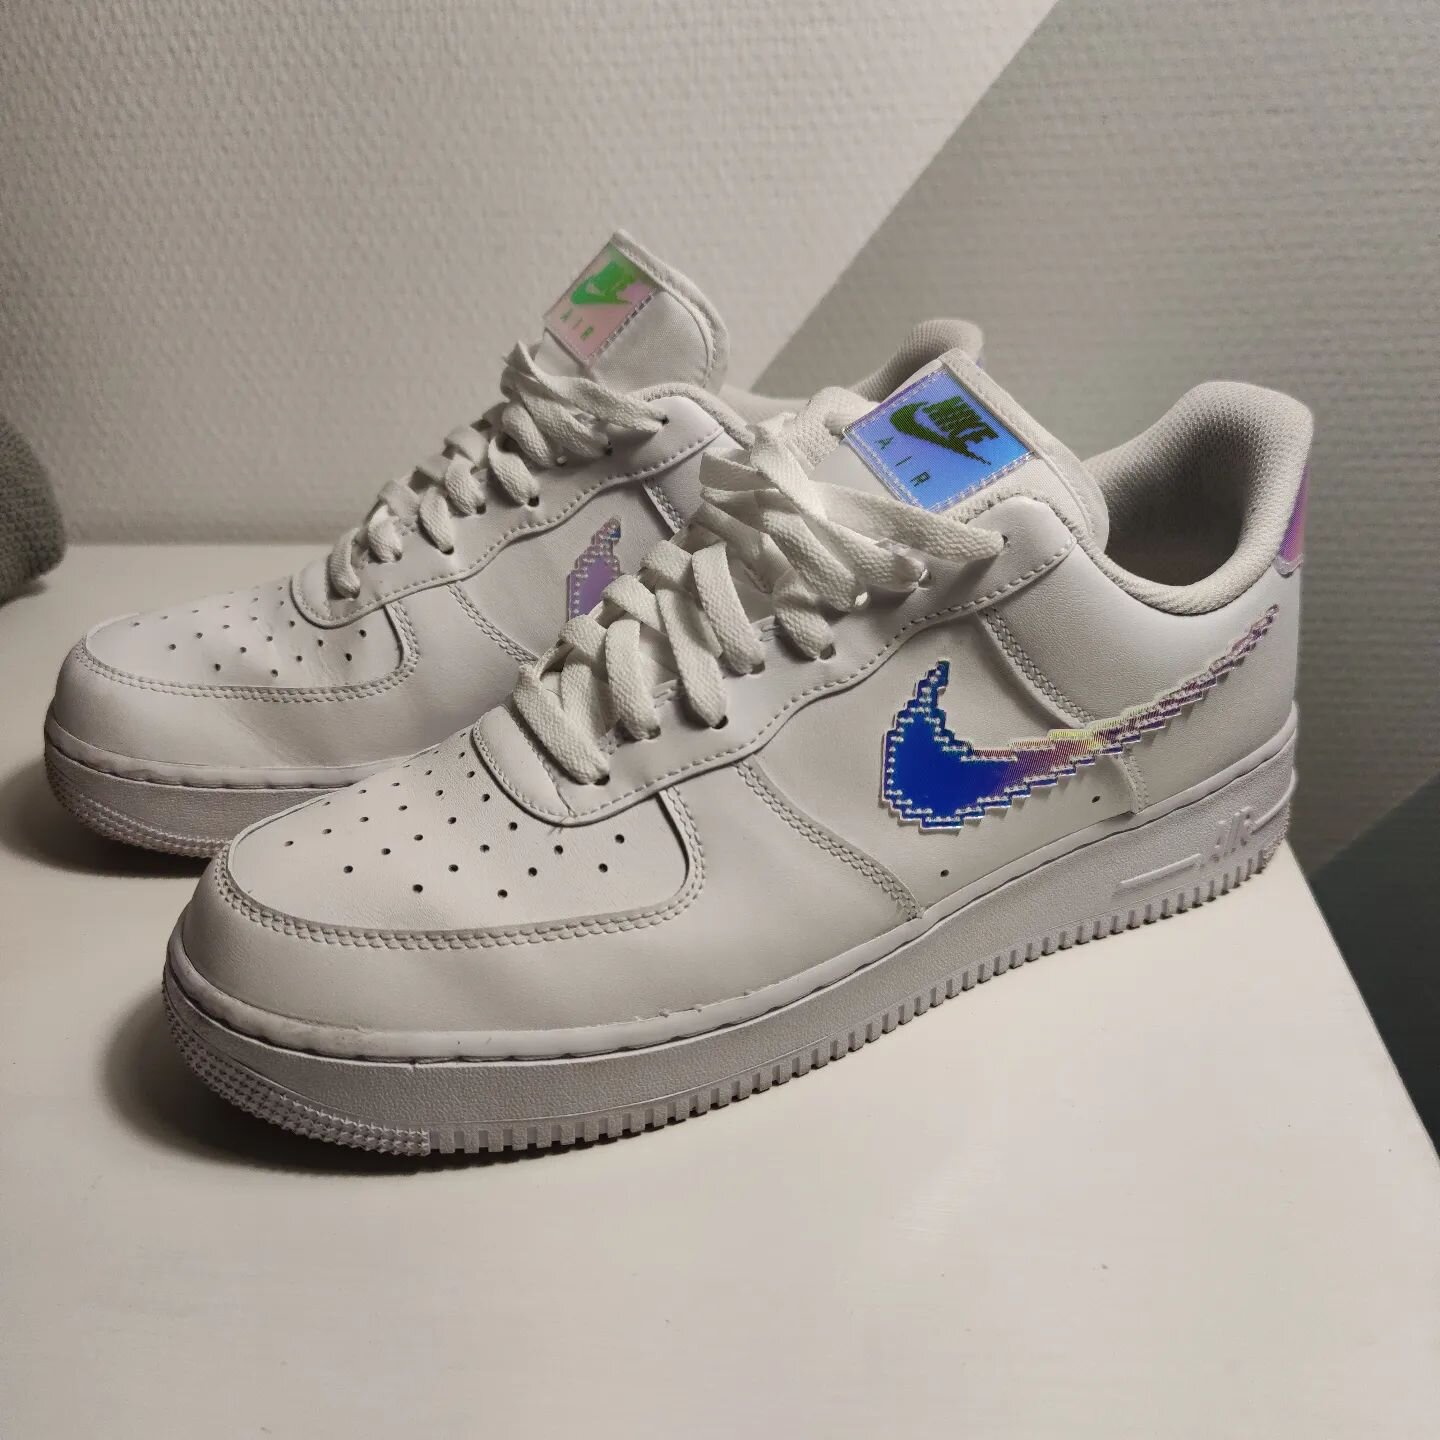 One of my favorite day 2 day #sneaker #nike #airforce1 LVL8 #digital #brabant